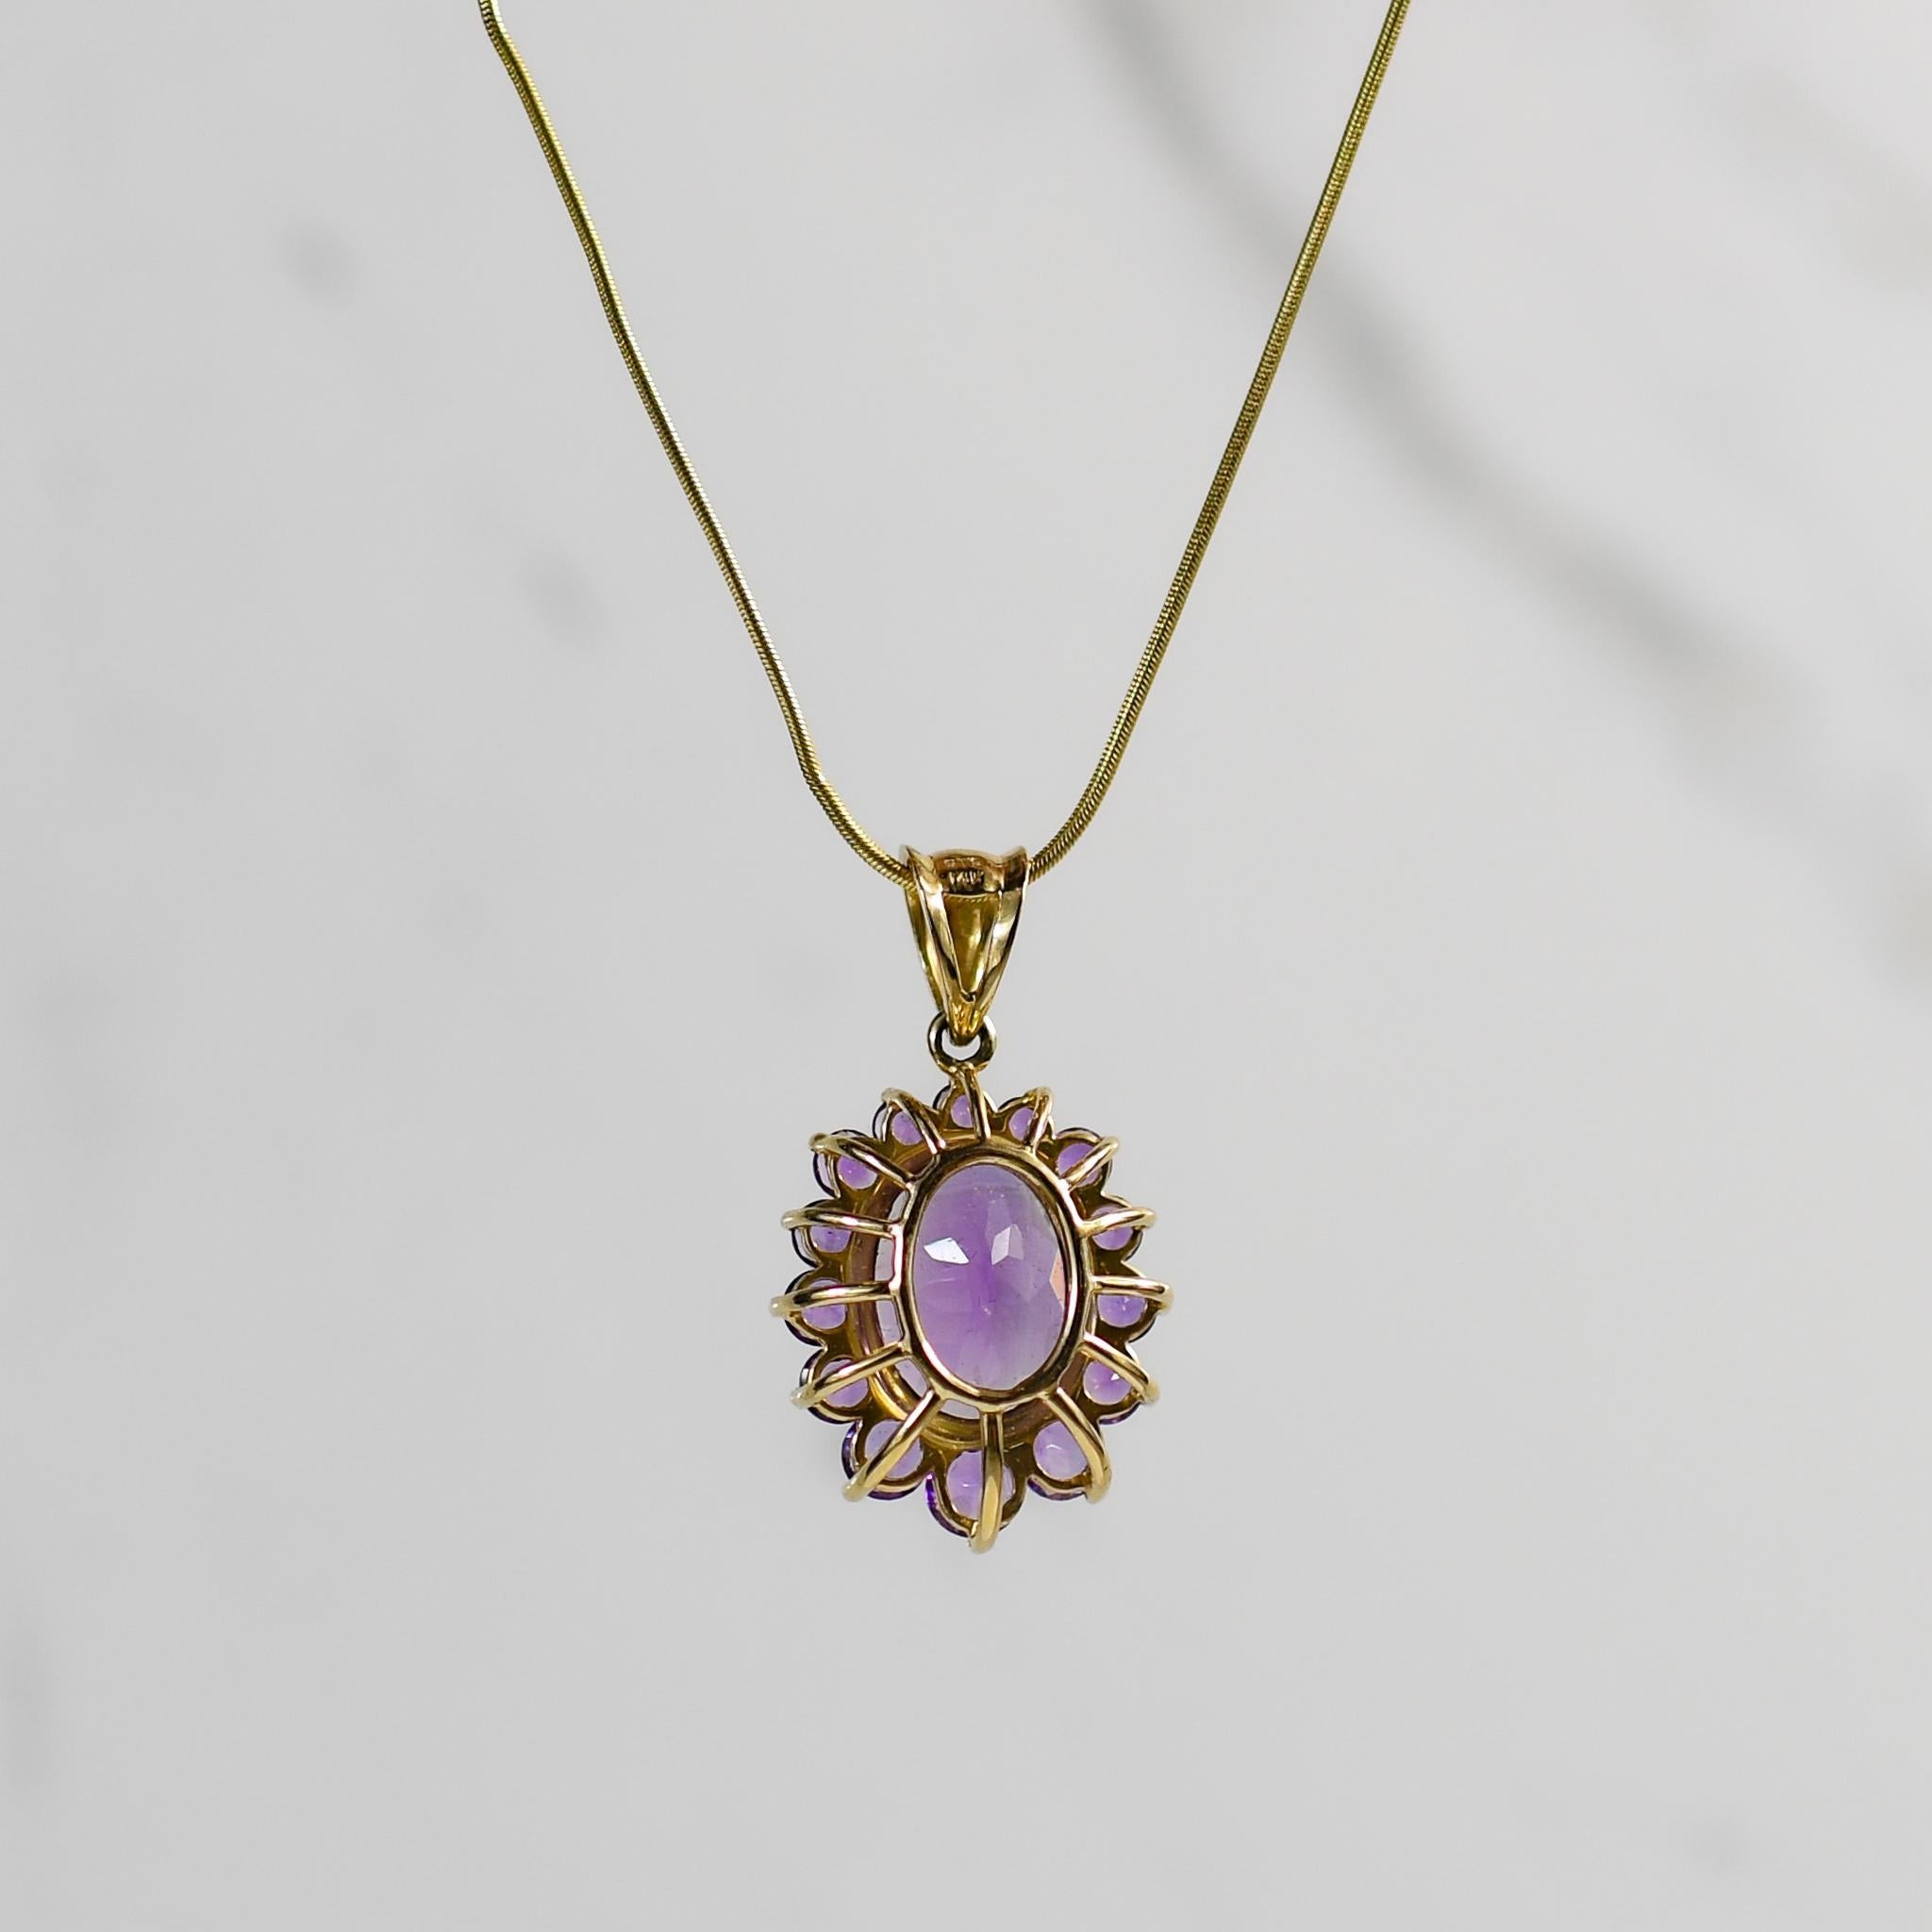 Illuminate your style with this exquisite flower-shaped amethyst necklace, a stunning expression of natural beauty and elegance. Crafted in lustrous 14k yellow gold, the intricate petals of the flower bloom around a captivating amethyst centerpiece,